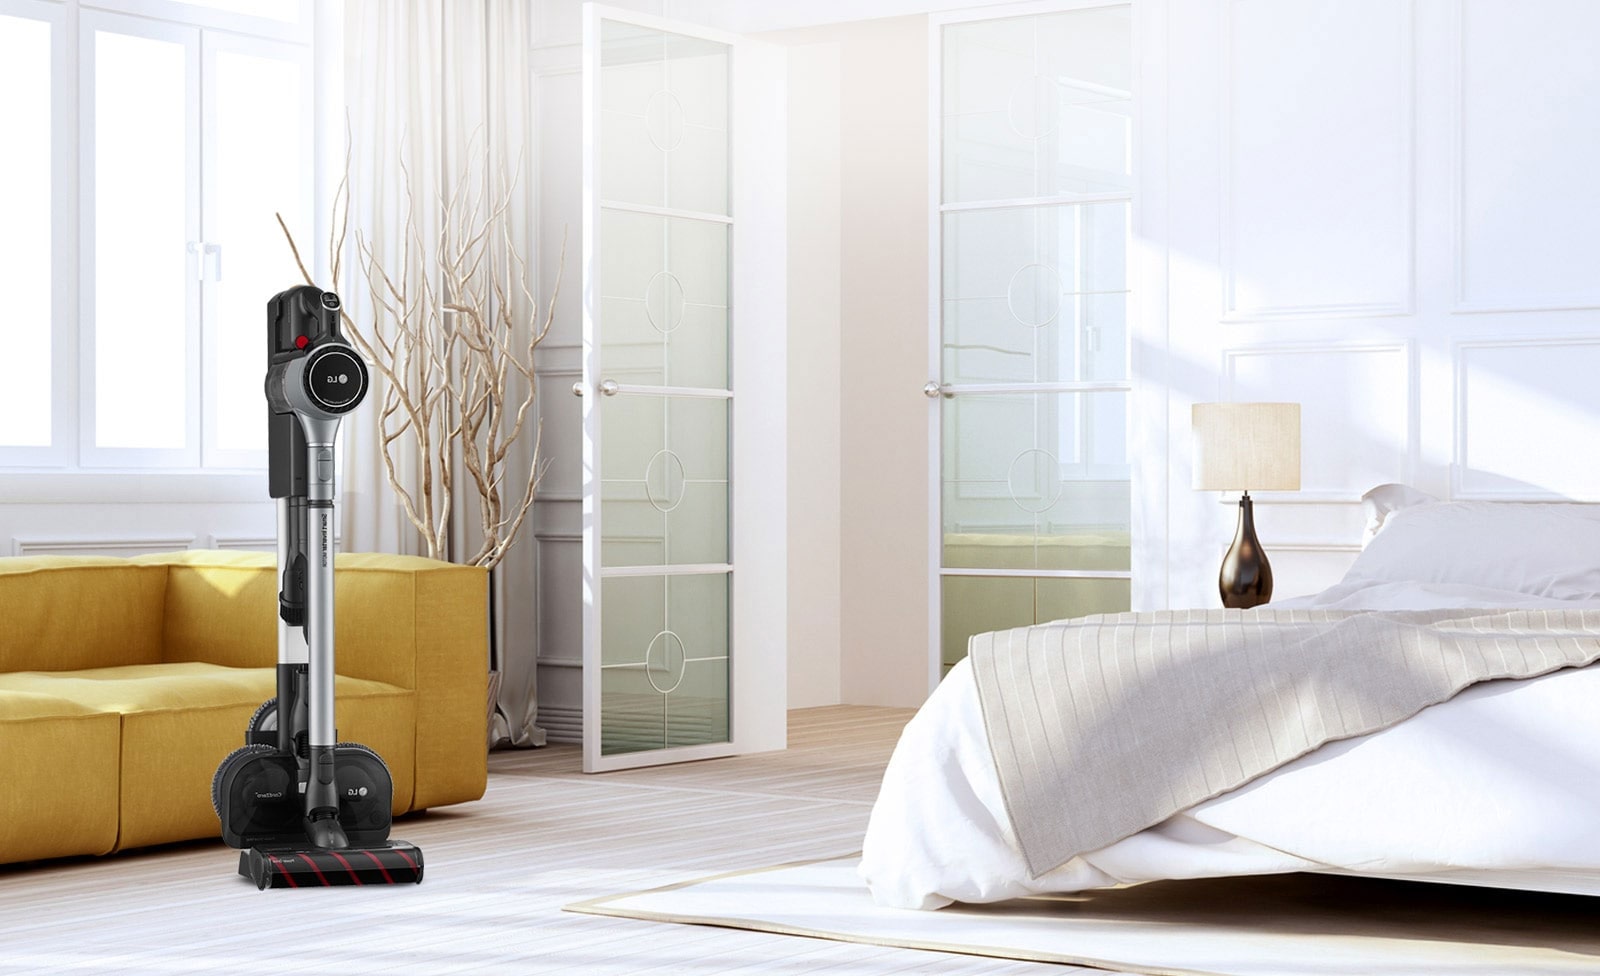 Three images show the vacuum cleaner in the charging stand in various locations:  the first has the charging stand next to a couch, the second it is next to a desk, and the third it is next to a bed.